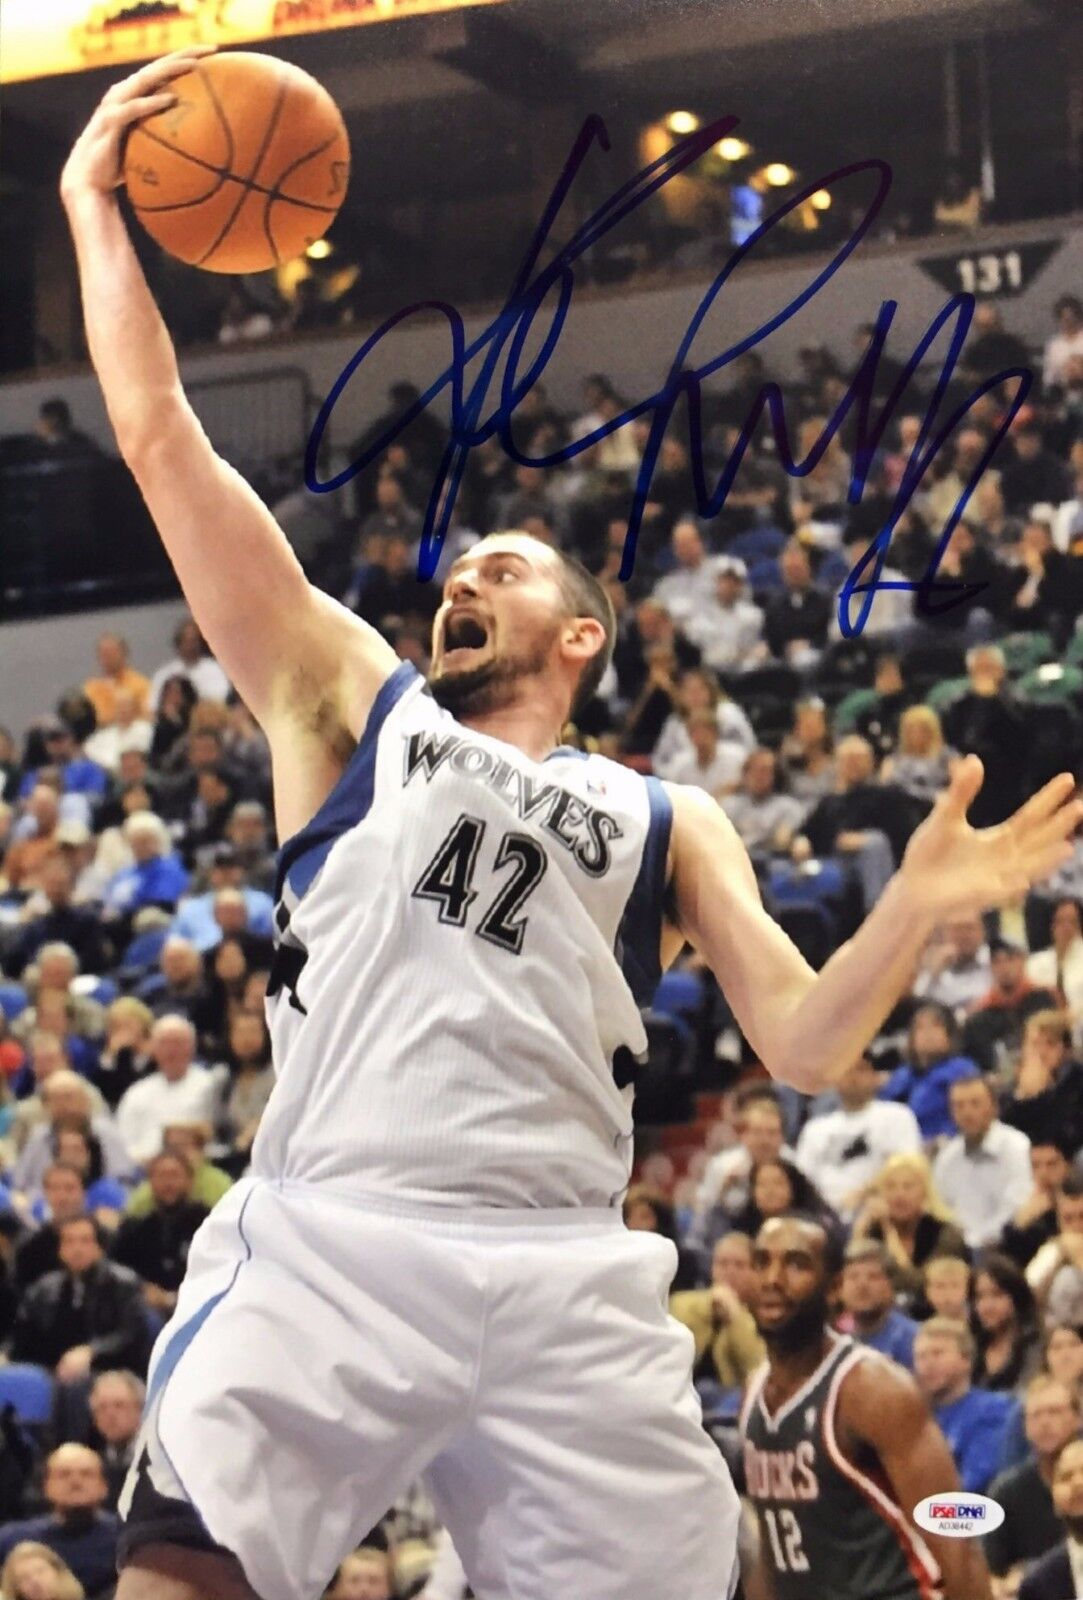 Kevin Love Signed Minnesota Timberwolves Basketball 12x18 Photo Poster painting PSA AD38442